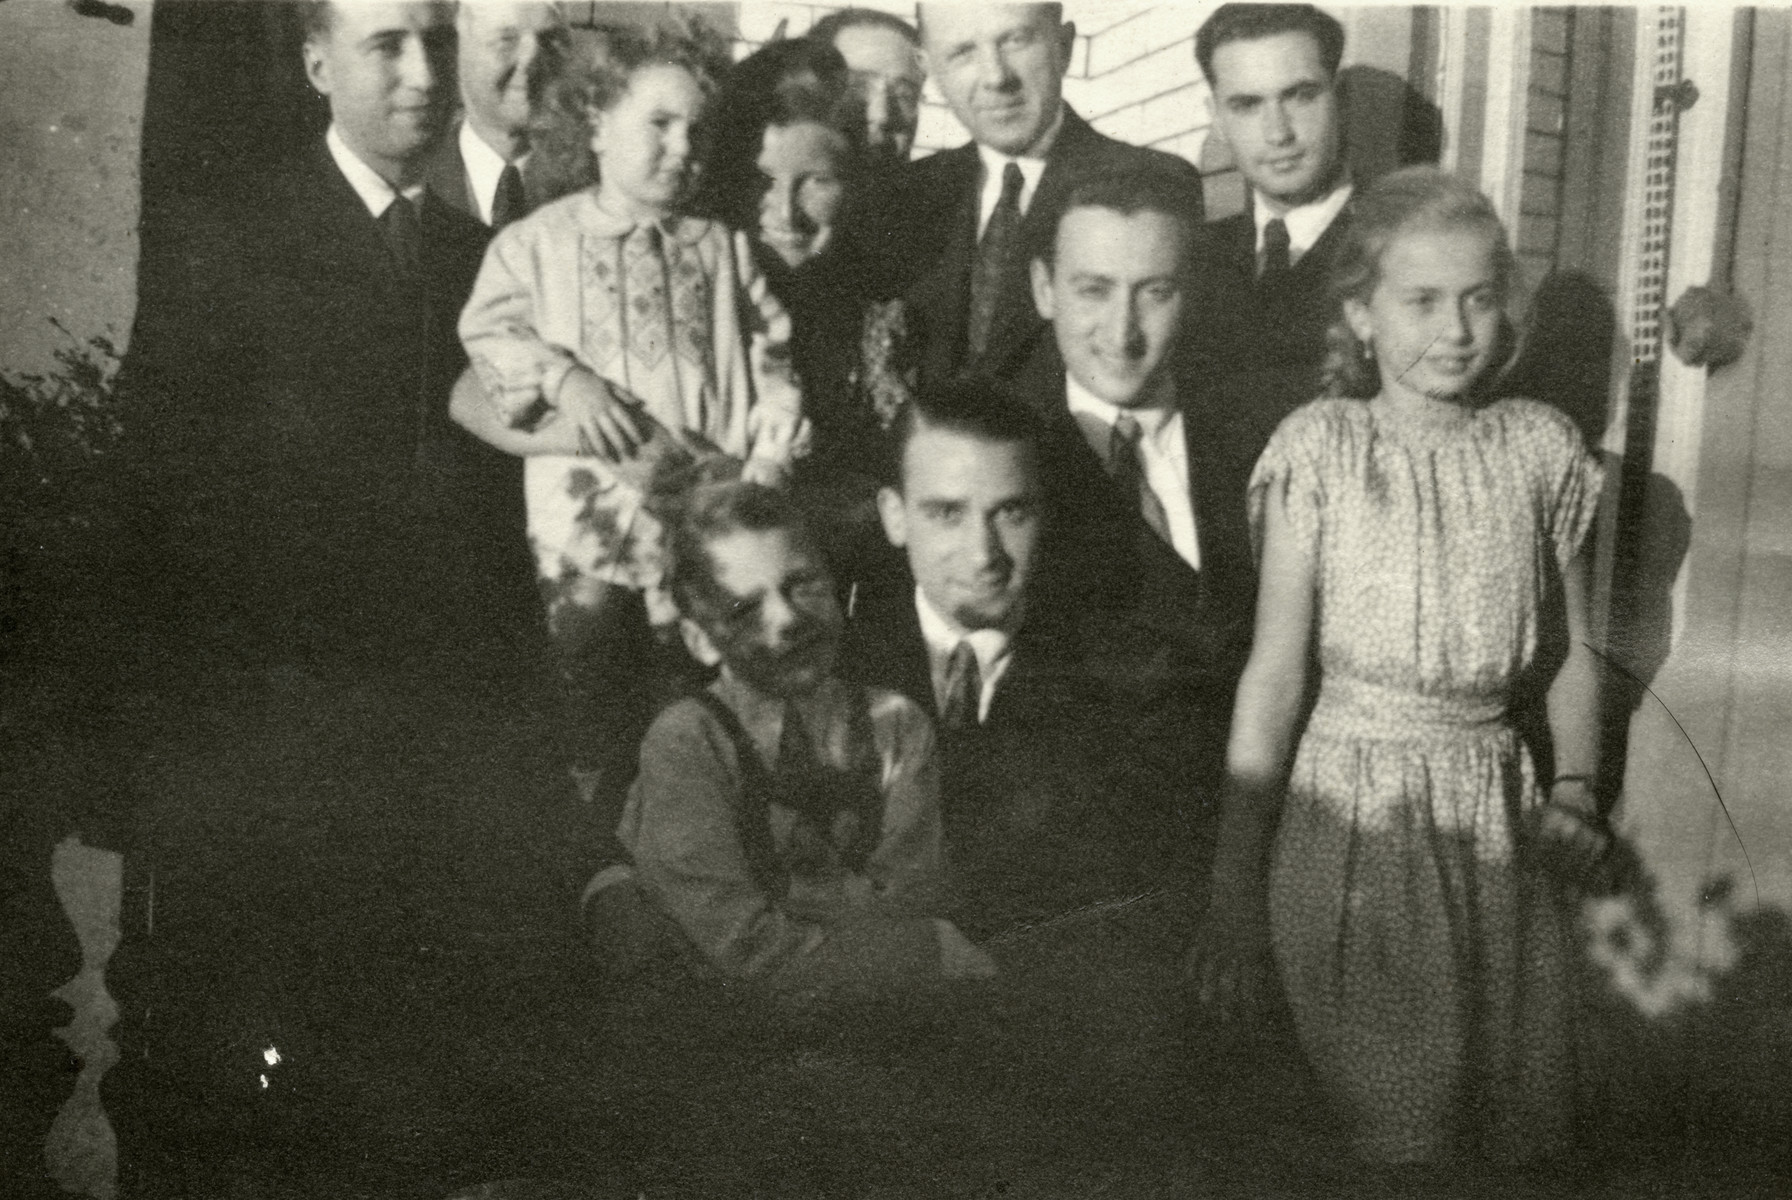 Mali Lamm, a Jew in hiding, poses with her rescuer's daughter and a group of men.

Mali Lam is pictured in back holding young child. Gerda Kreisse is pictured on the right.